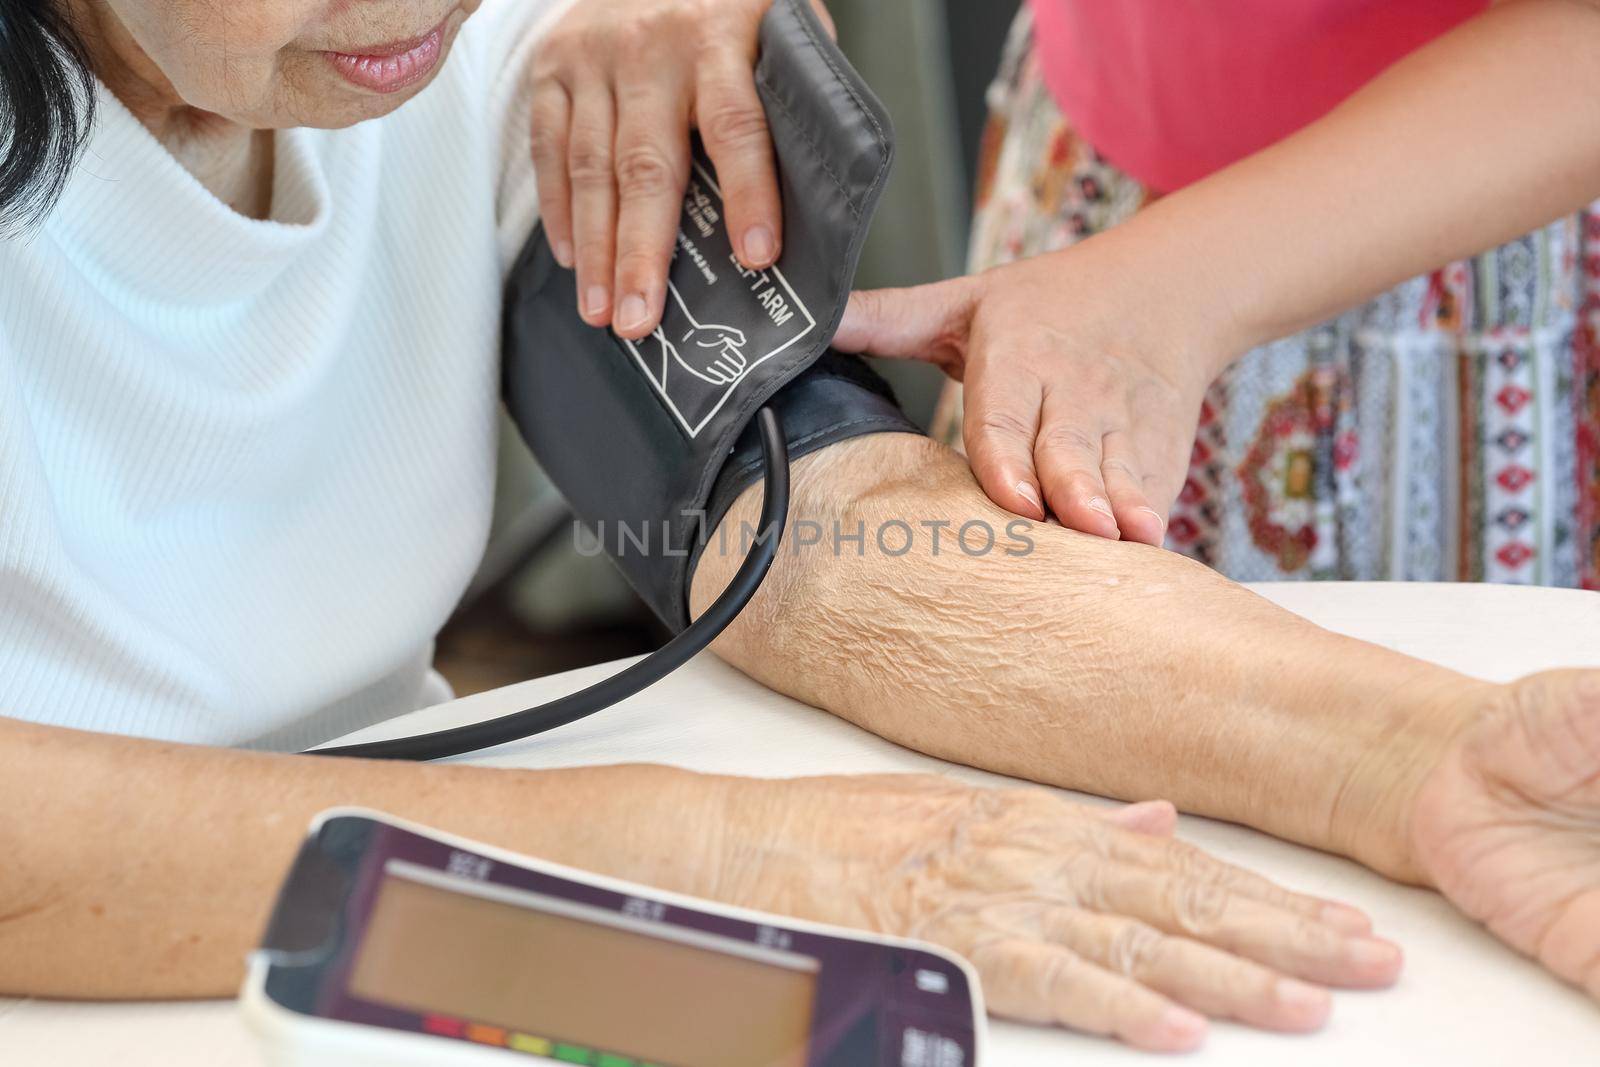 Daughter checking blood pressure (hypertension) of elderly mother at home by toa55